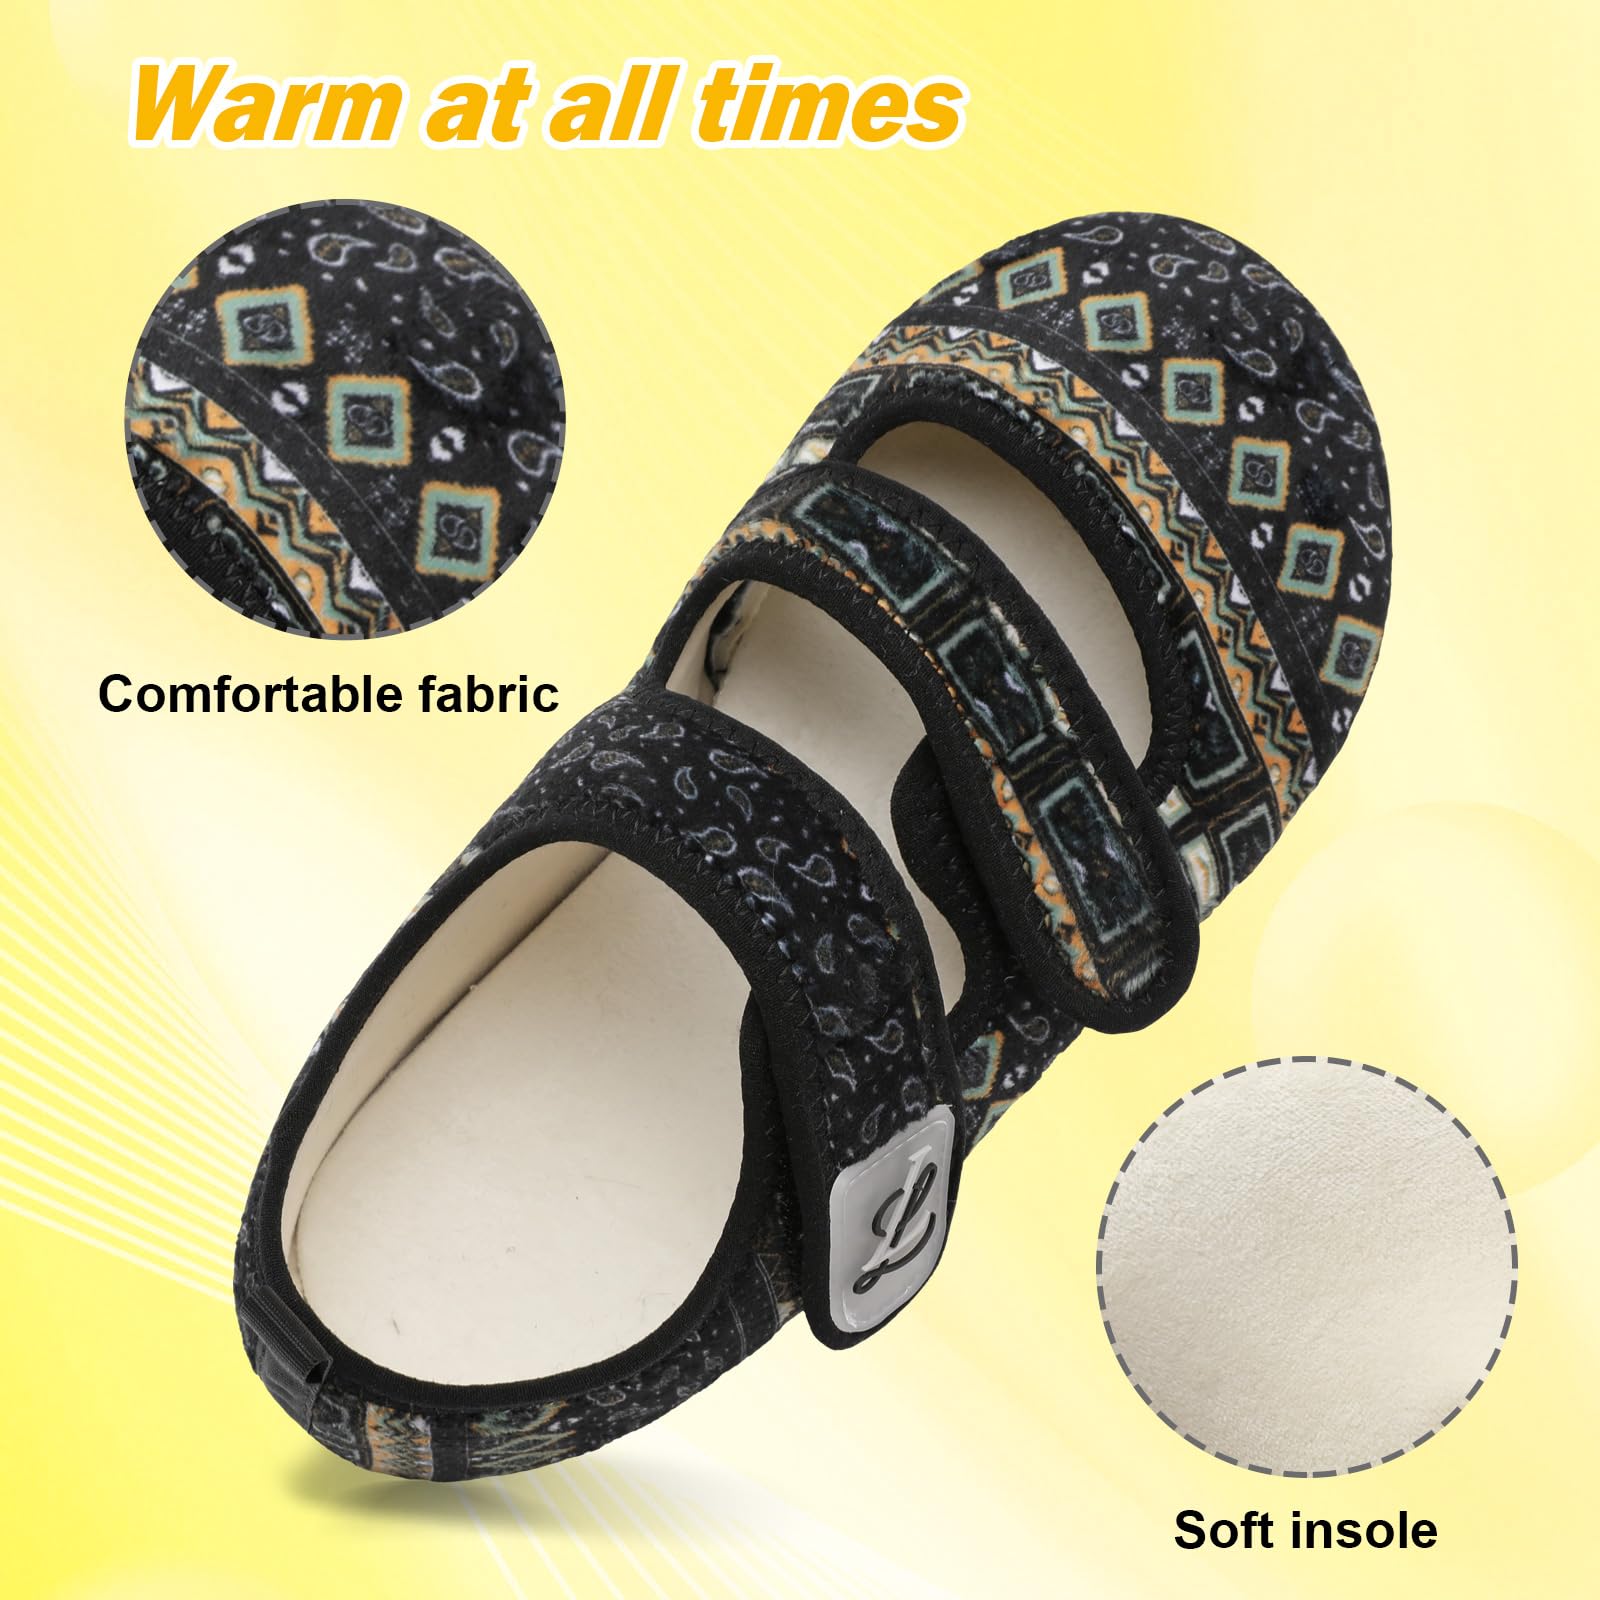 LeIsfIt Womens Mens Slippers Soft House Slippers Warm Fuzzy House Shoes Slipper Socks with Rubber Sole Indoor/Outdoor